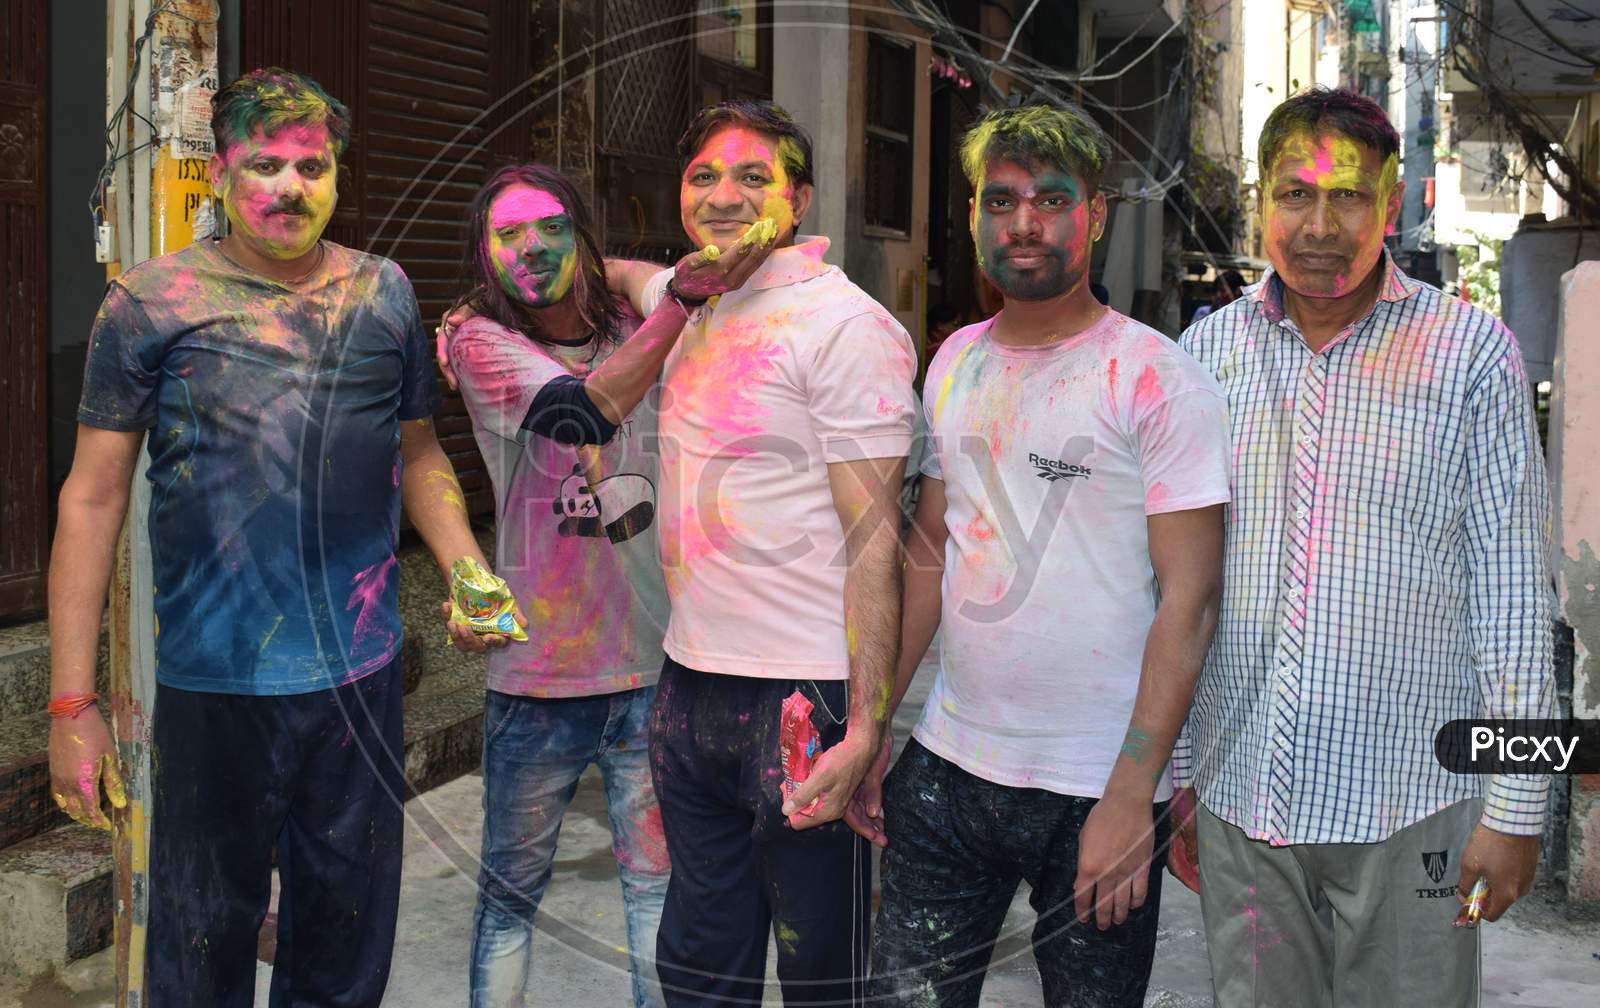 Indians playing with Colors during Holi Festival